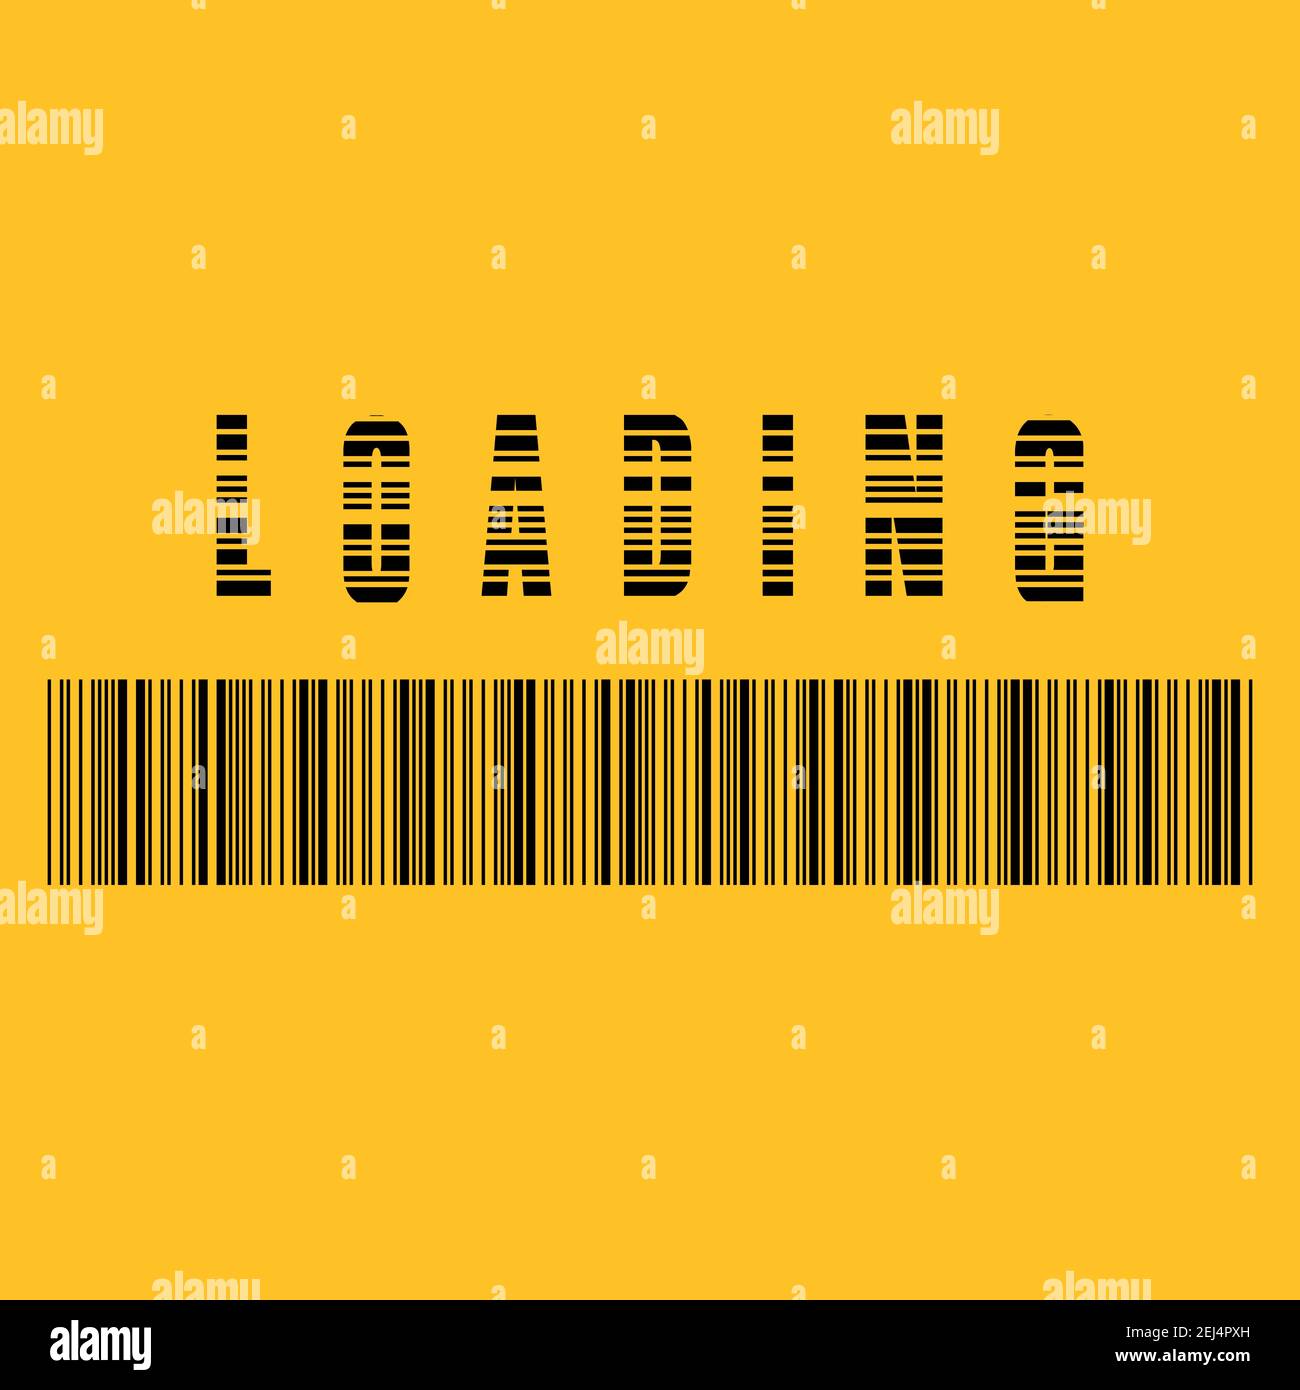 Abstract composition. Loading bar element icon. Creative web design download timer. Users completion indicator. Yellow background, black cluster lines Stock Vector